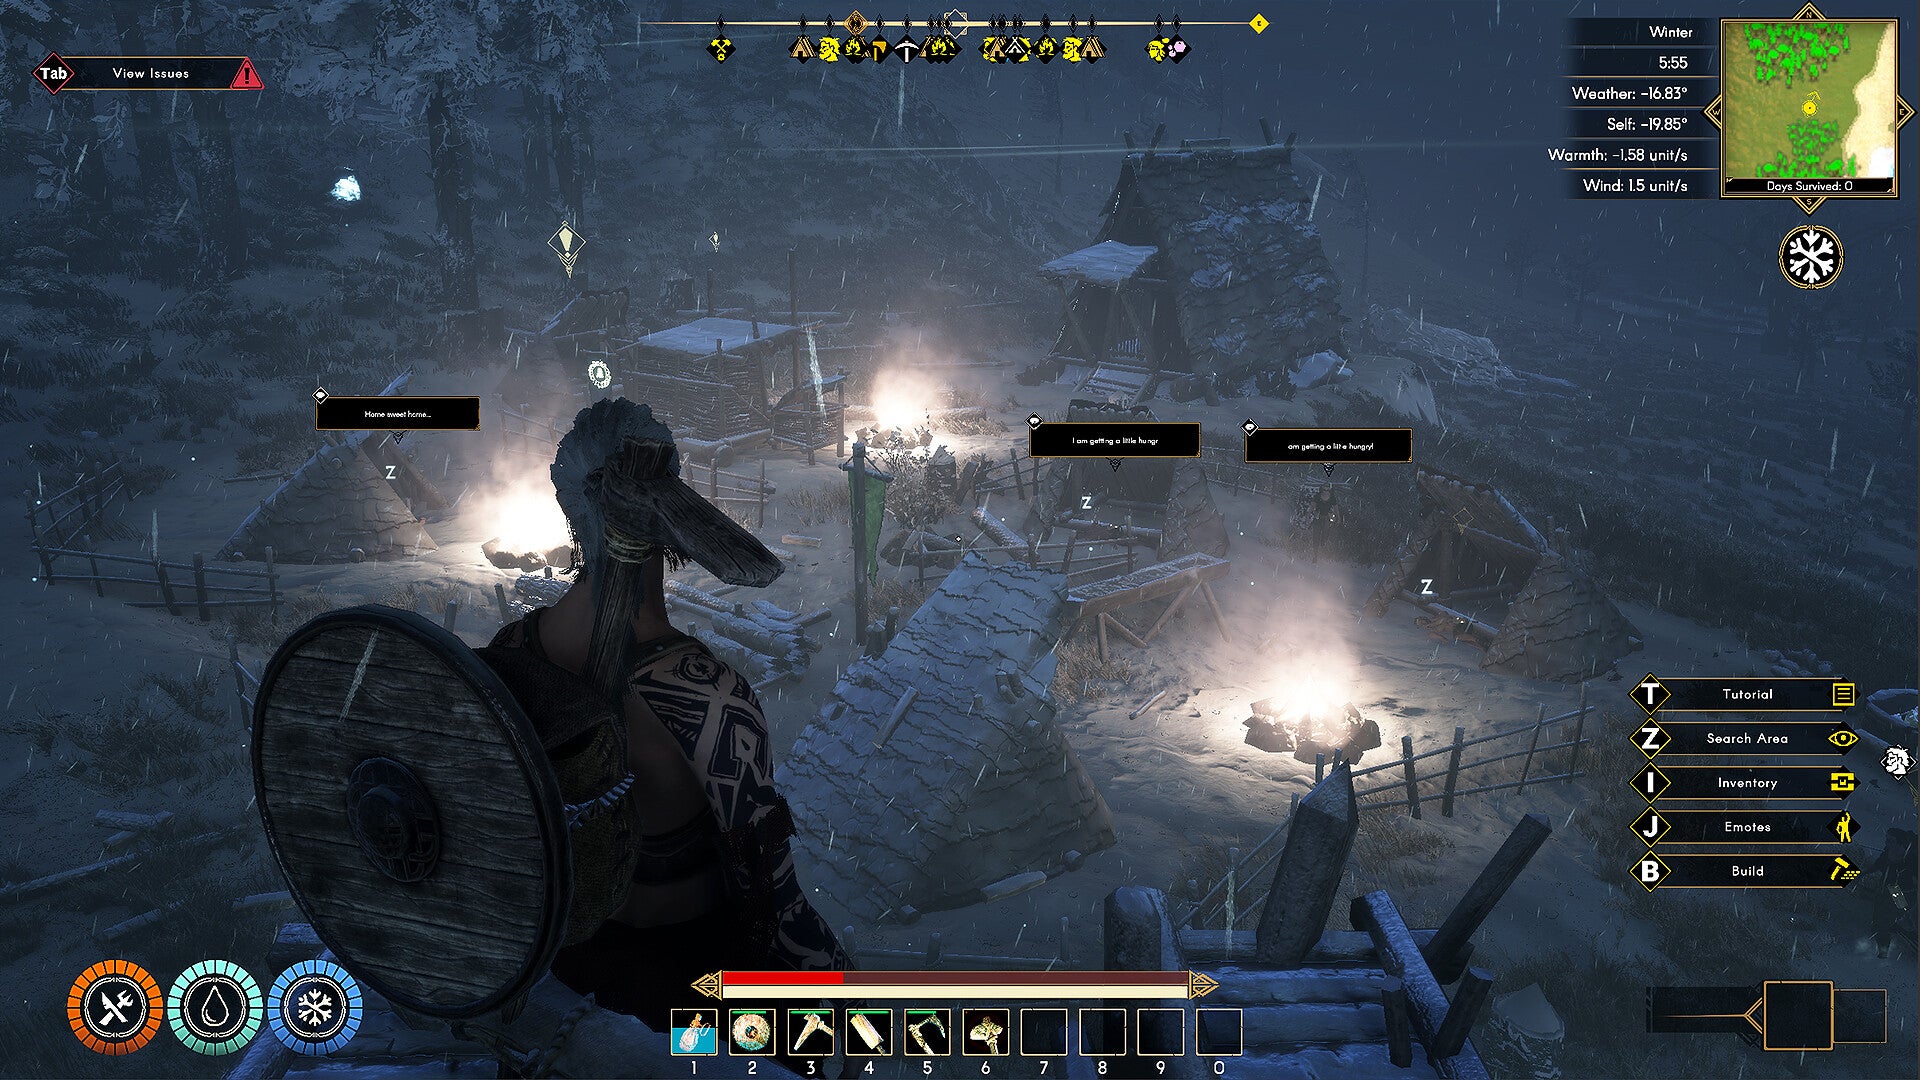 A viking surveys their town in the night time snow in Aska.